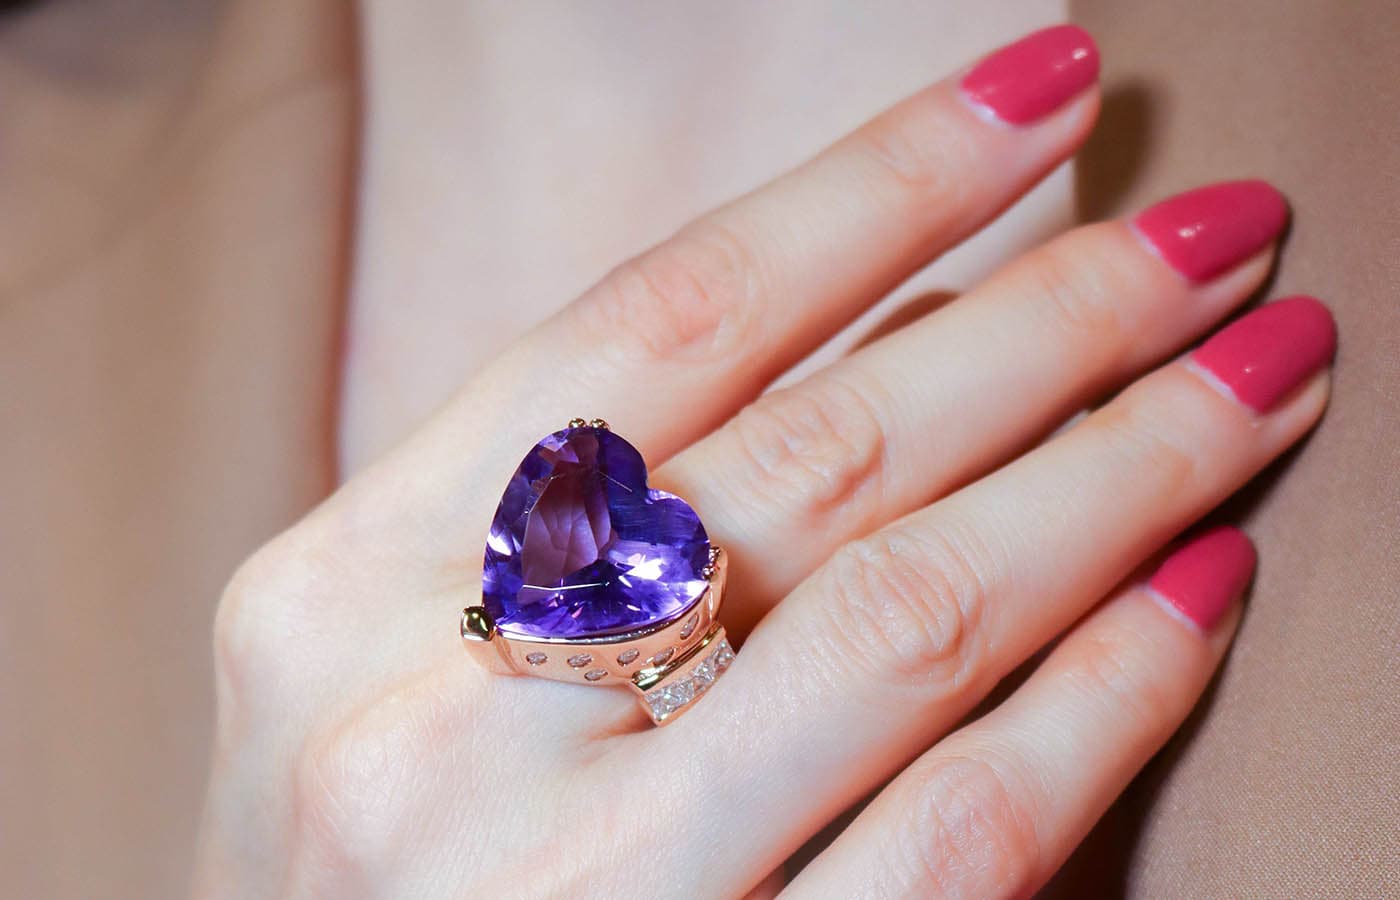 De' Lazzari-Oro Addosso heart-shaped amethyst cocktail ring with diamonds in rose gold